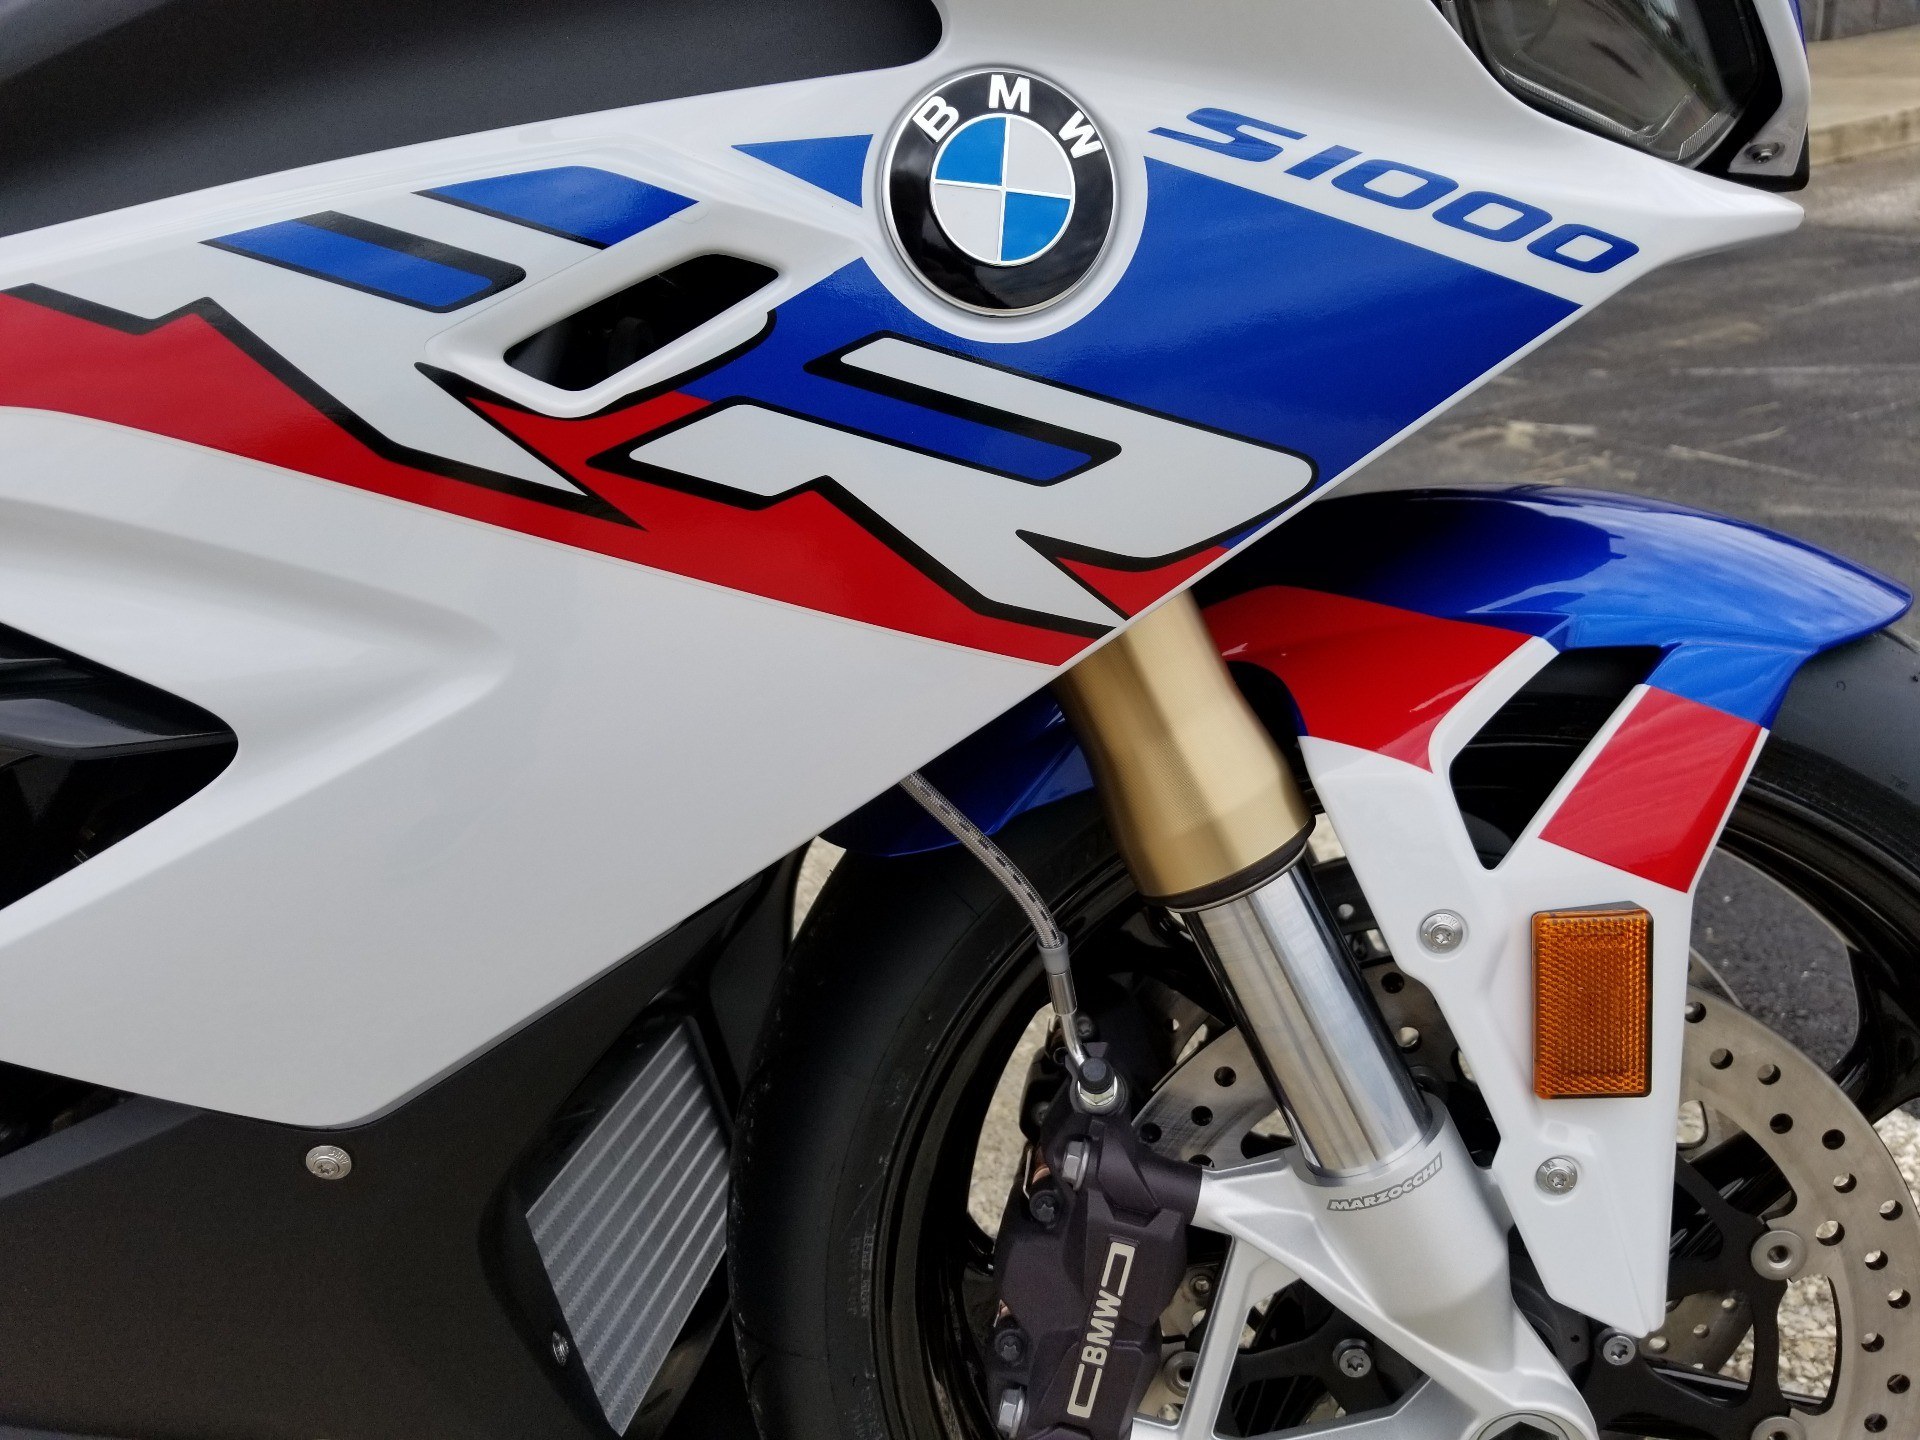 New 2021 BMW S1000RR Motorcycles in Aurora, OH | Stock Number: N/A